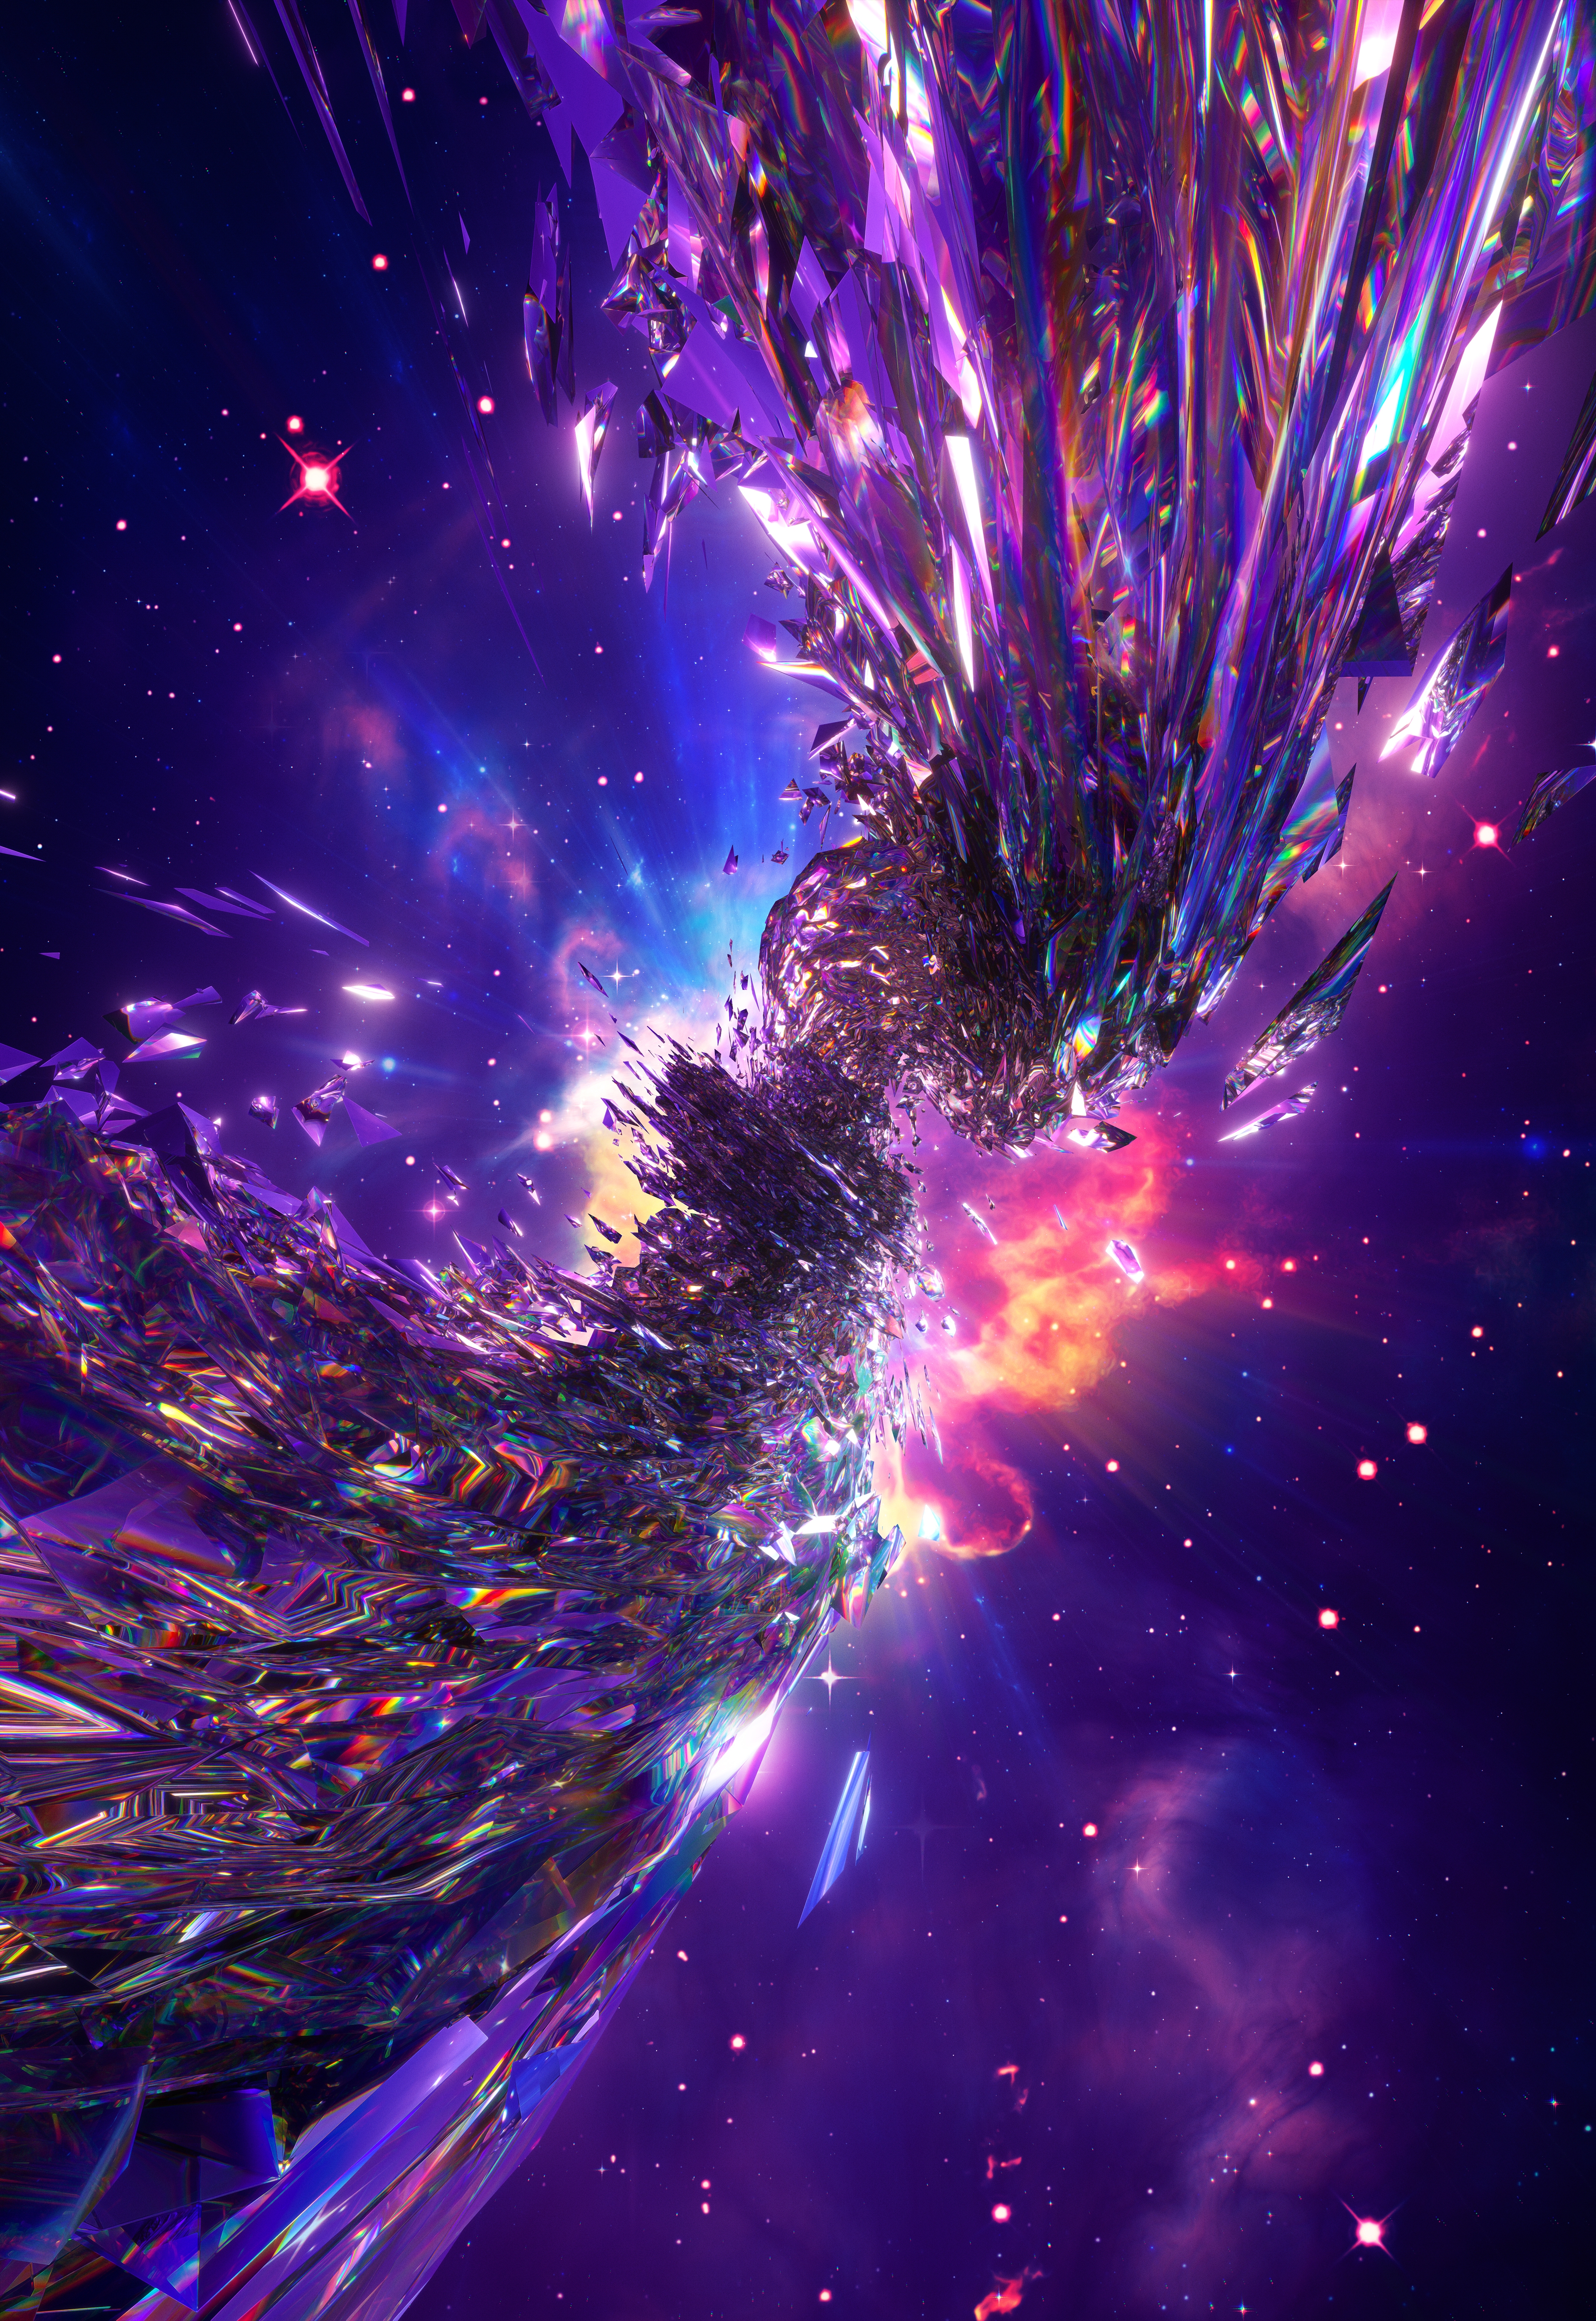 HD wallpaper, Cataclysm, Psychedelic, Colorful, Rainbow, Swarm, Extinction